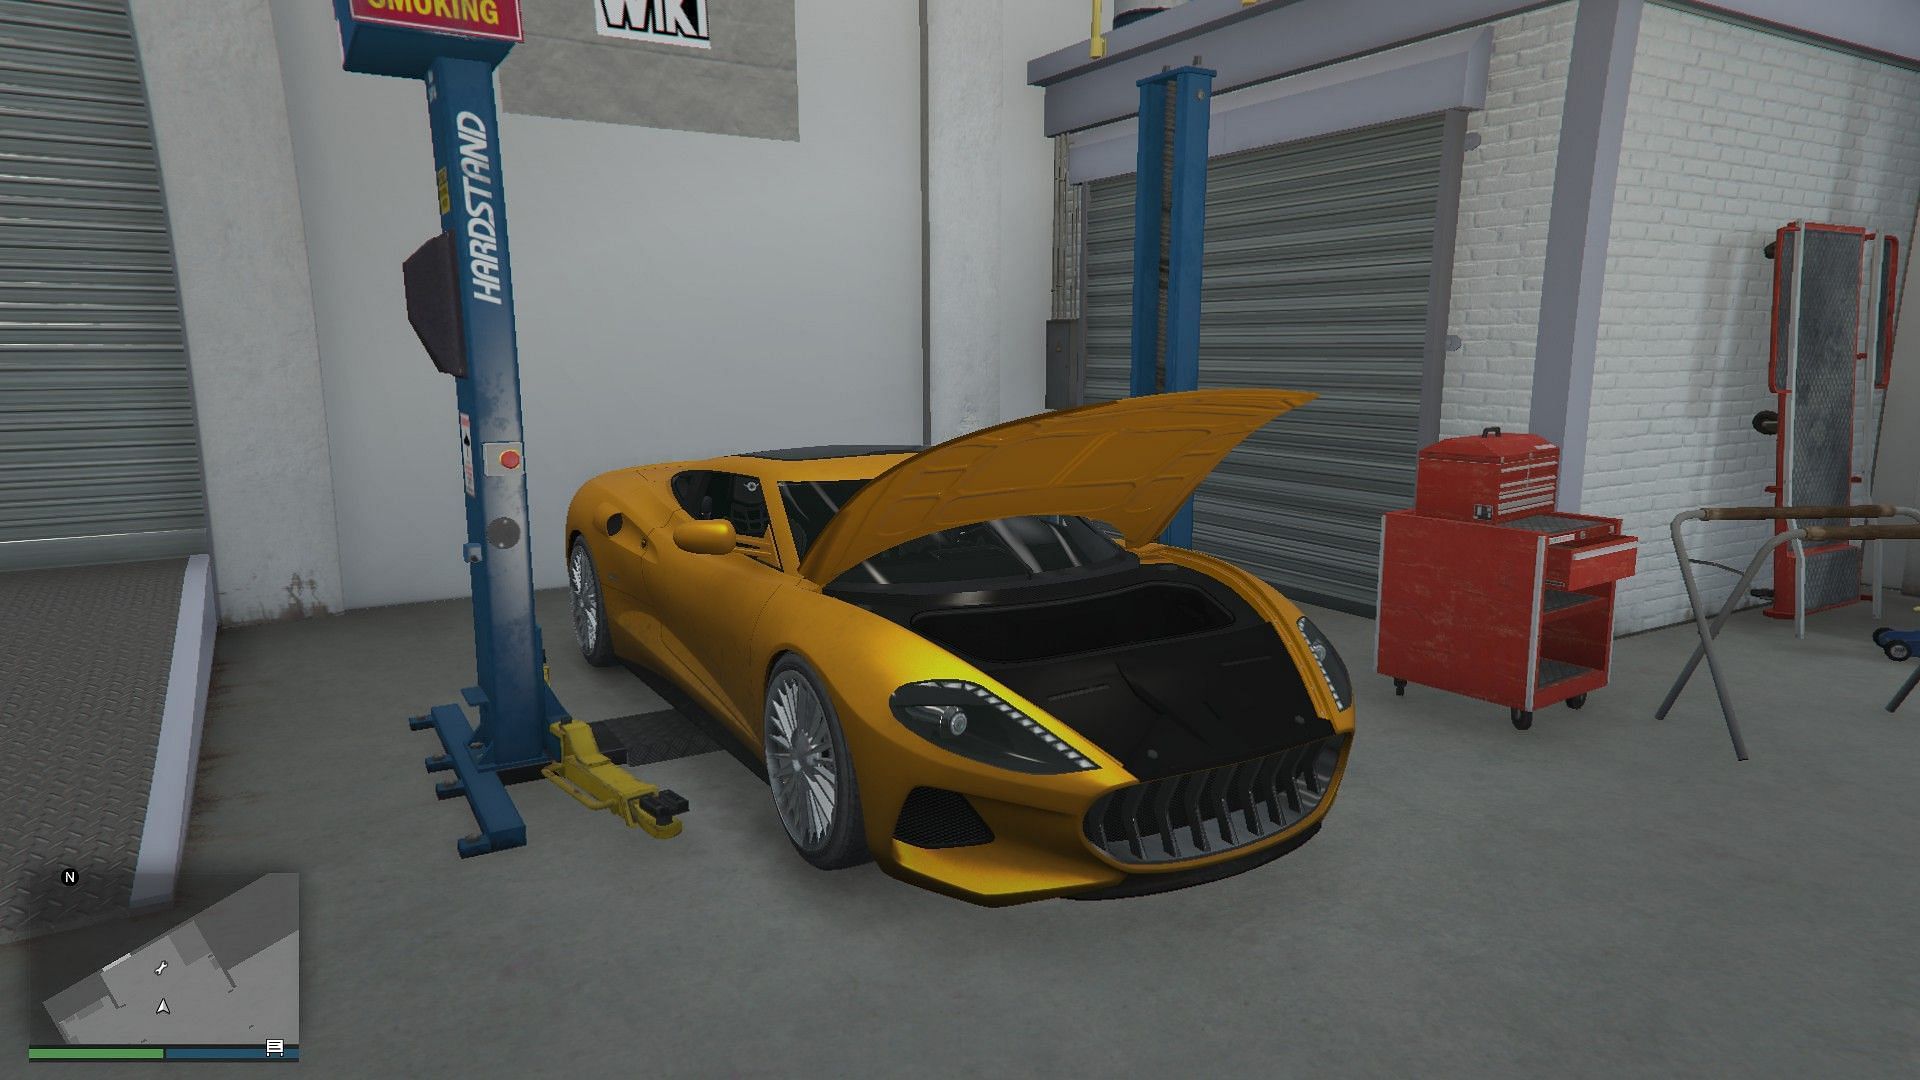 The Neo is a "removed car" still available to acquire from the Auto Shop (Image via GTA Wiki)